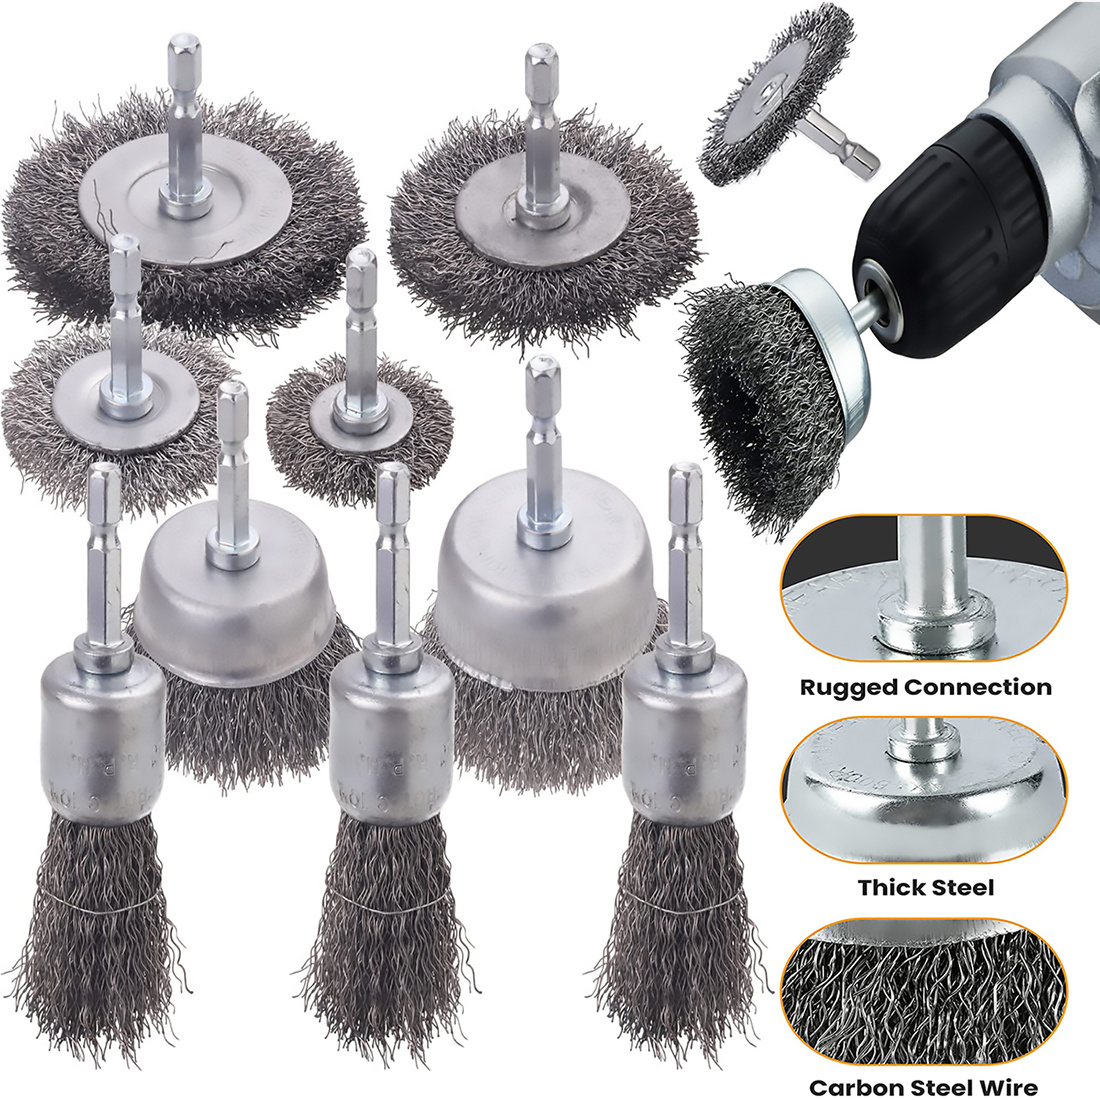 Wire Brush Wheel Cup Brush Set, 9 Pieces Wire Brush for Drill 1/4 Inch  Shank, Coarse Brass Coated Crimped Wire Brushes for Cleaning Rust, Flakes  and